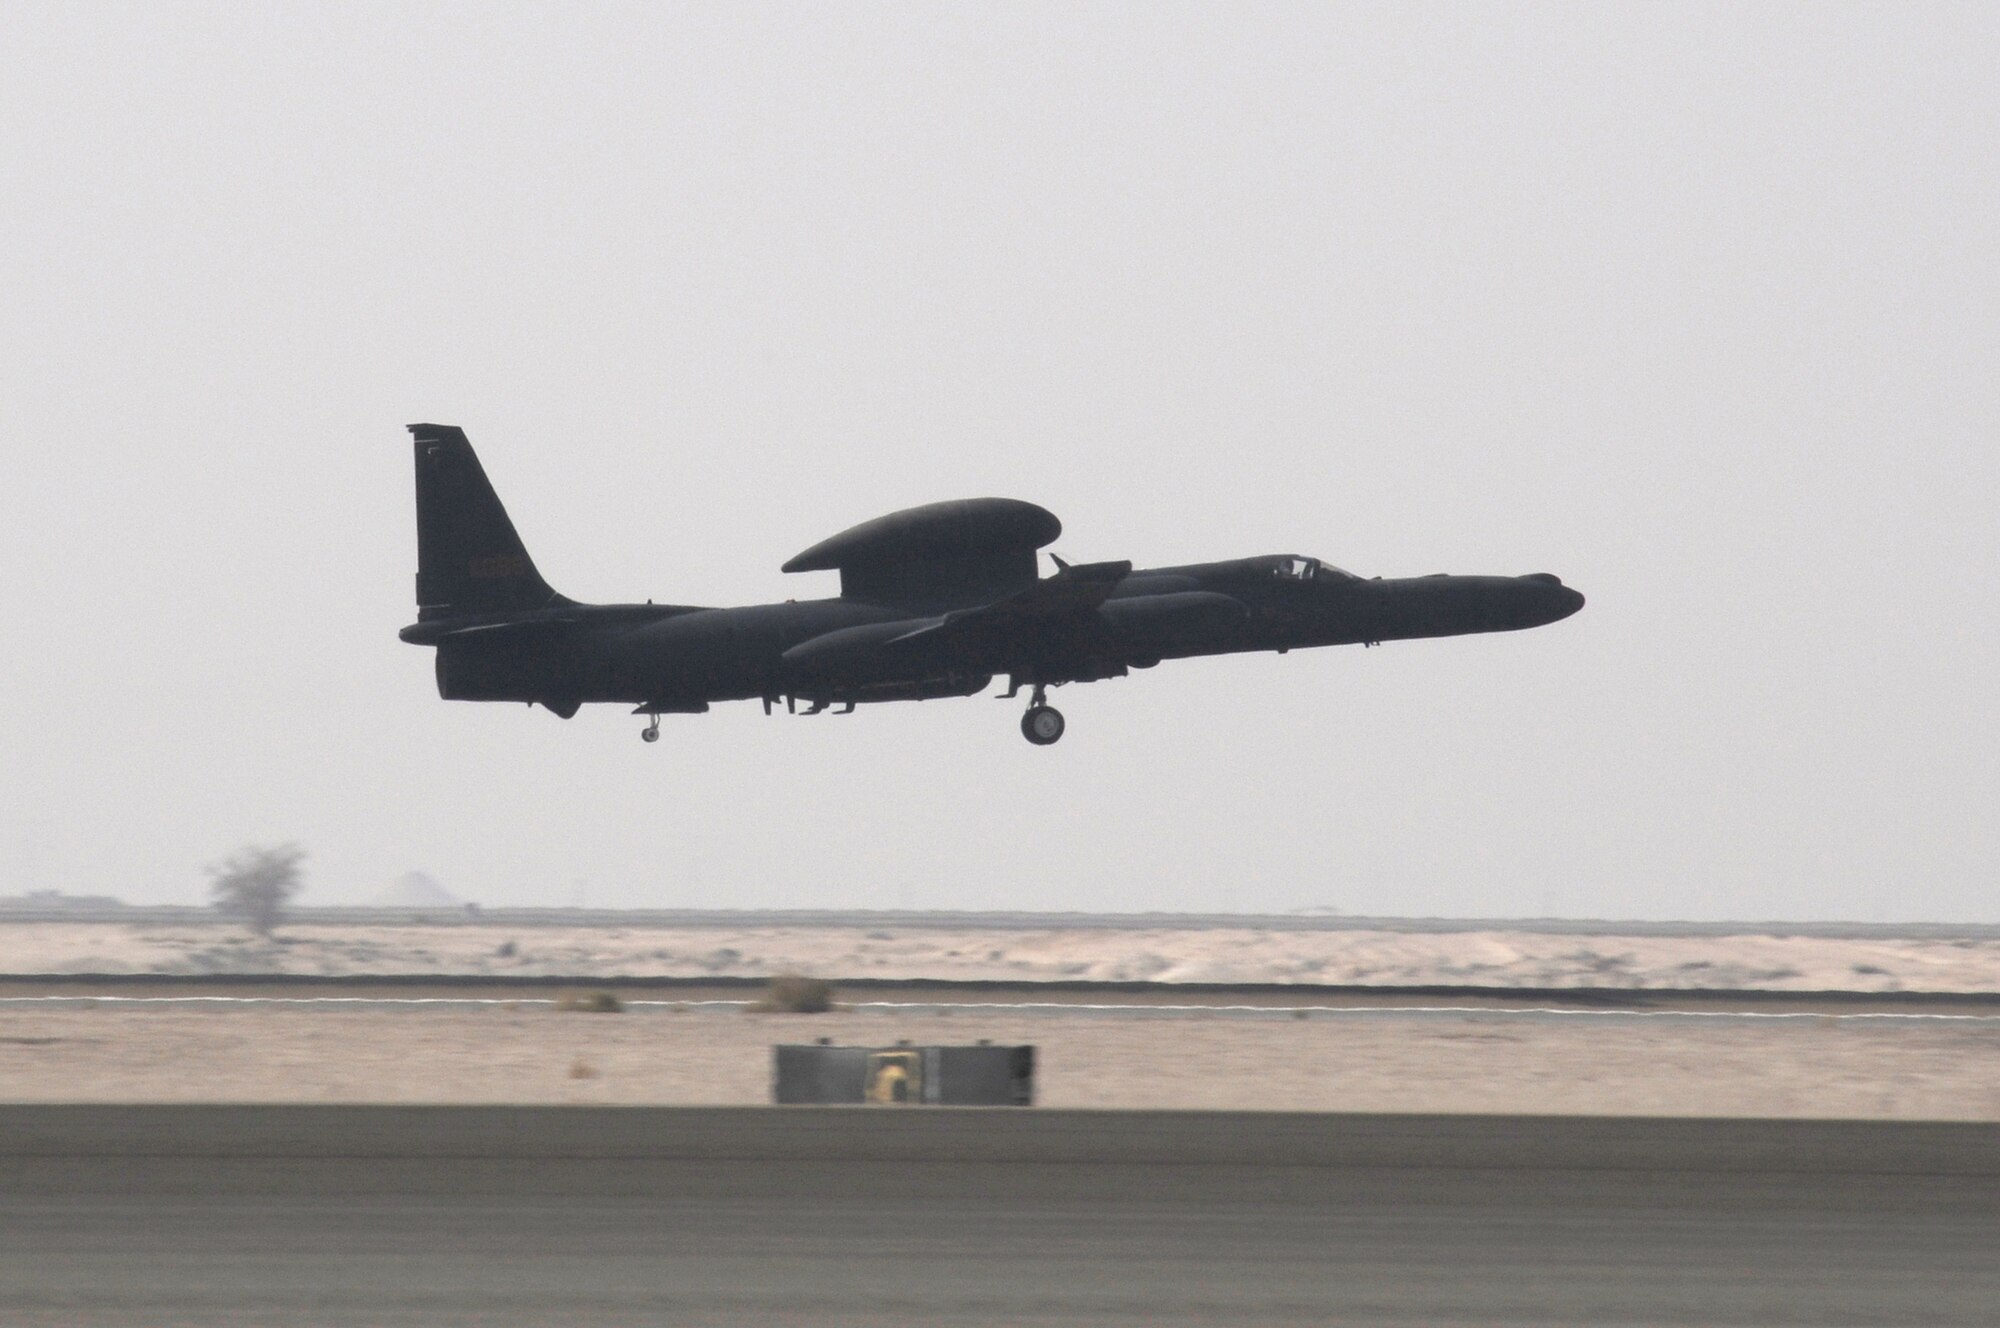 SOUTHWEST ASIA -- Major Thomas Ryan, 99th Expeditionary Reconnaissance Squadron, mission pilot, takes off for his 2000 hour flight at the helm of a U-2 Dragonlady, Jan. 9. Maj. Ryan is the 25th pilot to reach the 2000 hour milestone. Maj. Ryan is deployed to the 380th Air Expeditionary Wing from the 9th Reconnaissance Squadron, Beale AFB, Calif. and hails from Sneads Ferry, N.C. Calif. (U.S. Air Force photo by Senior Airman Brian J. Ellis)(Released)